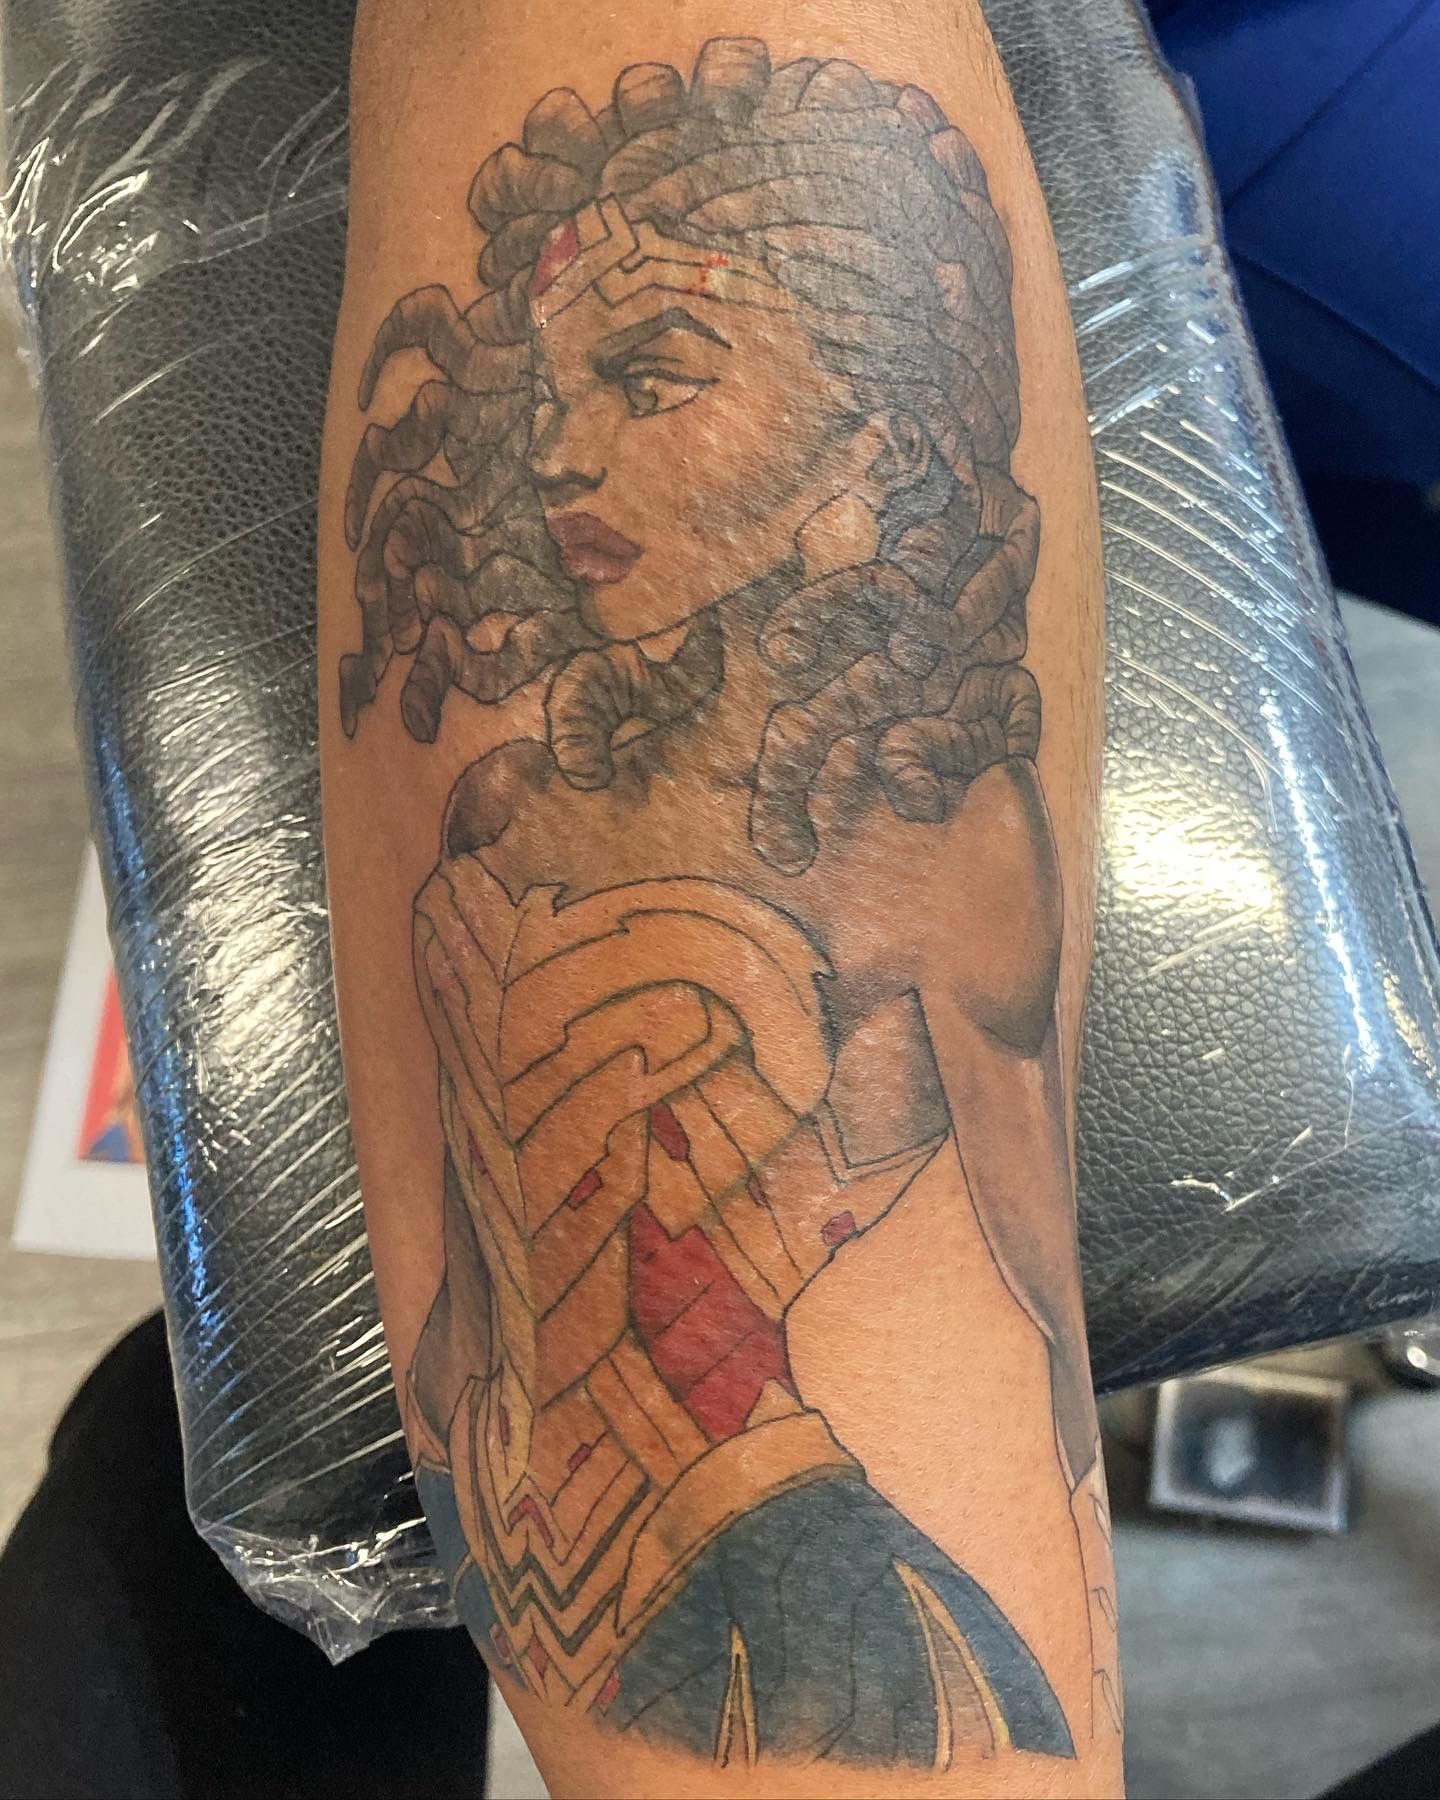 Emblem of wonder woman, iconic, cosmic colors, tattoo stencil on Craiyon